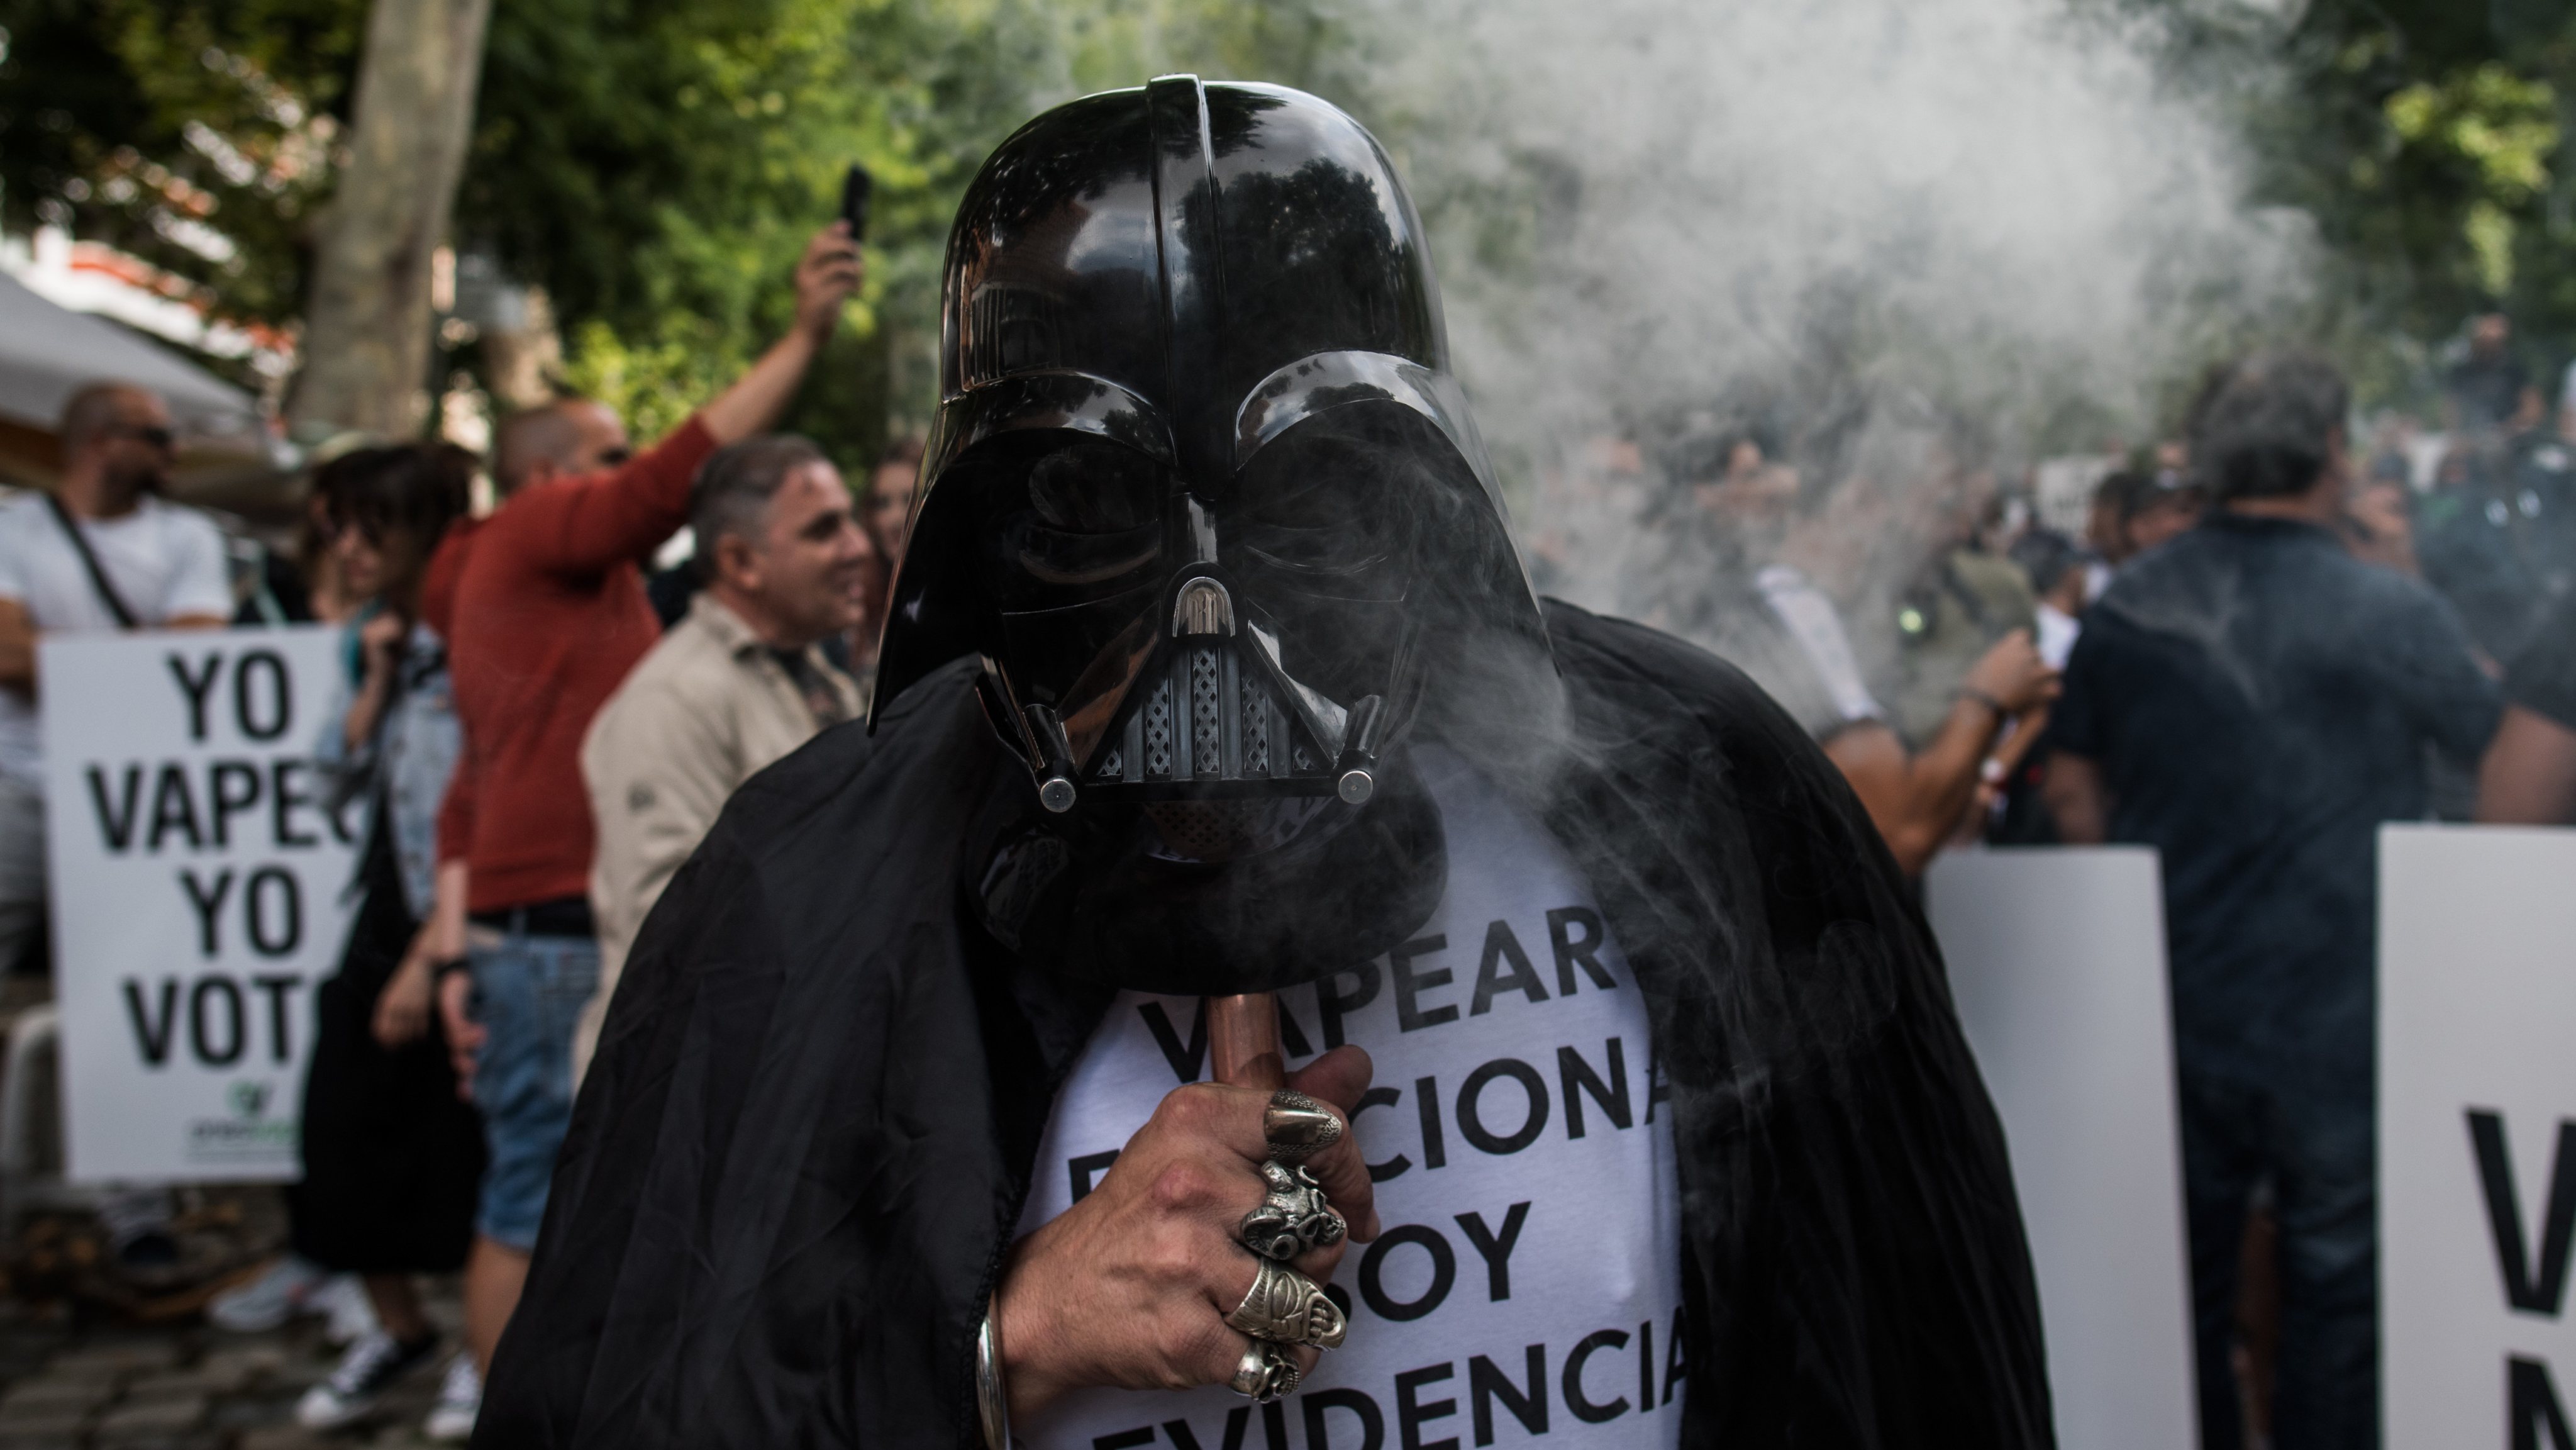 A man with a Darth Vader mask vaping in front of the